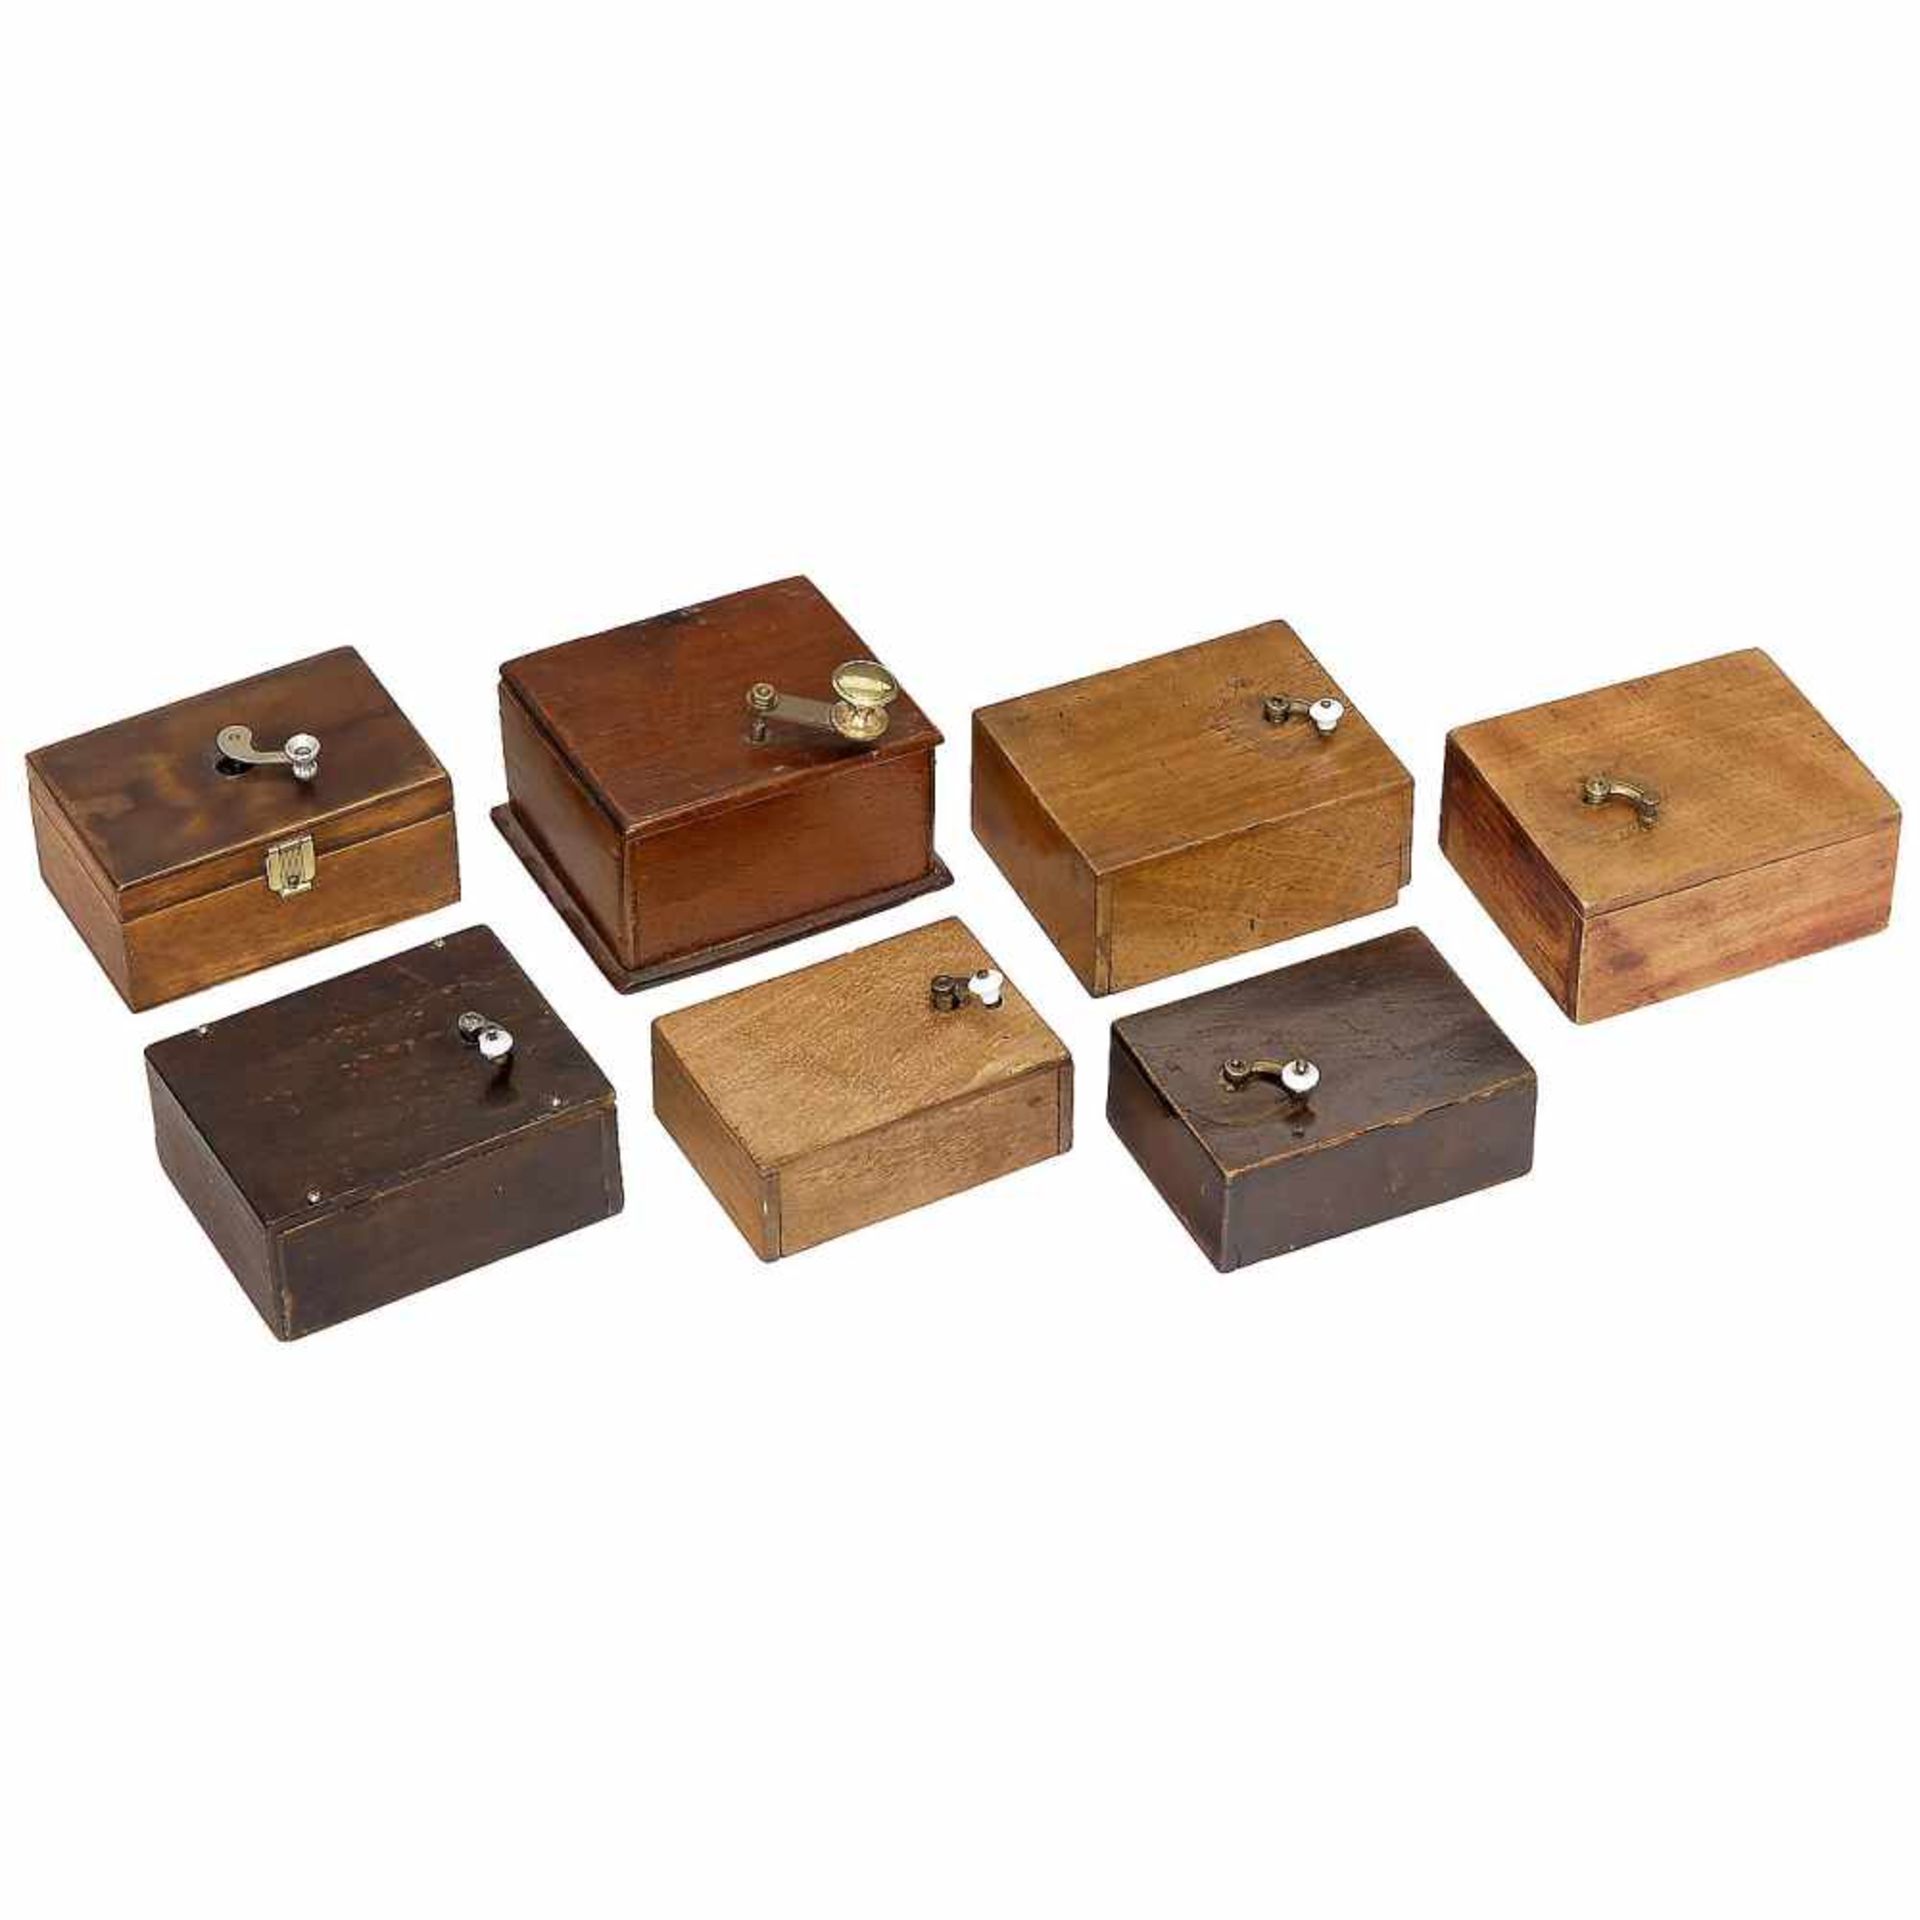 7 Manivelle Musical BoxesHand-turned movements in rectangular wood cases, mixed condition, not